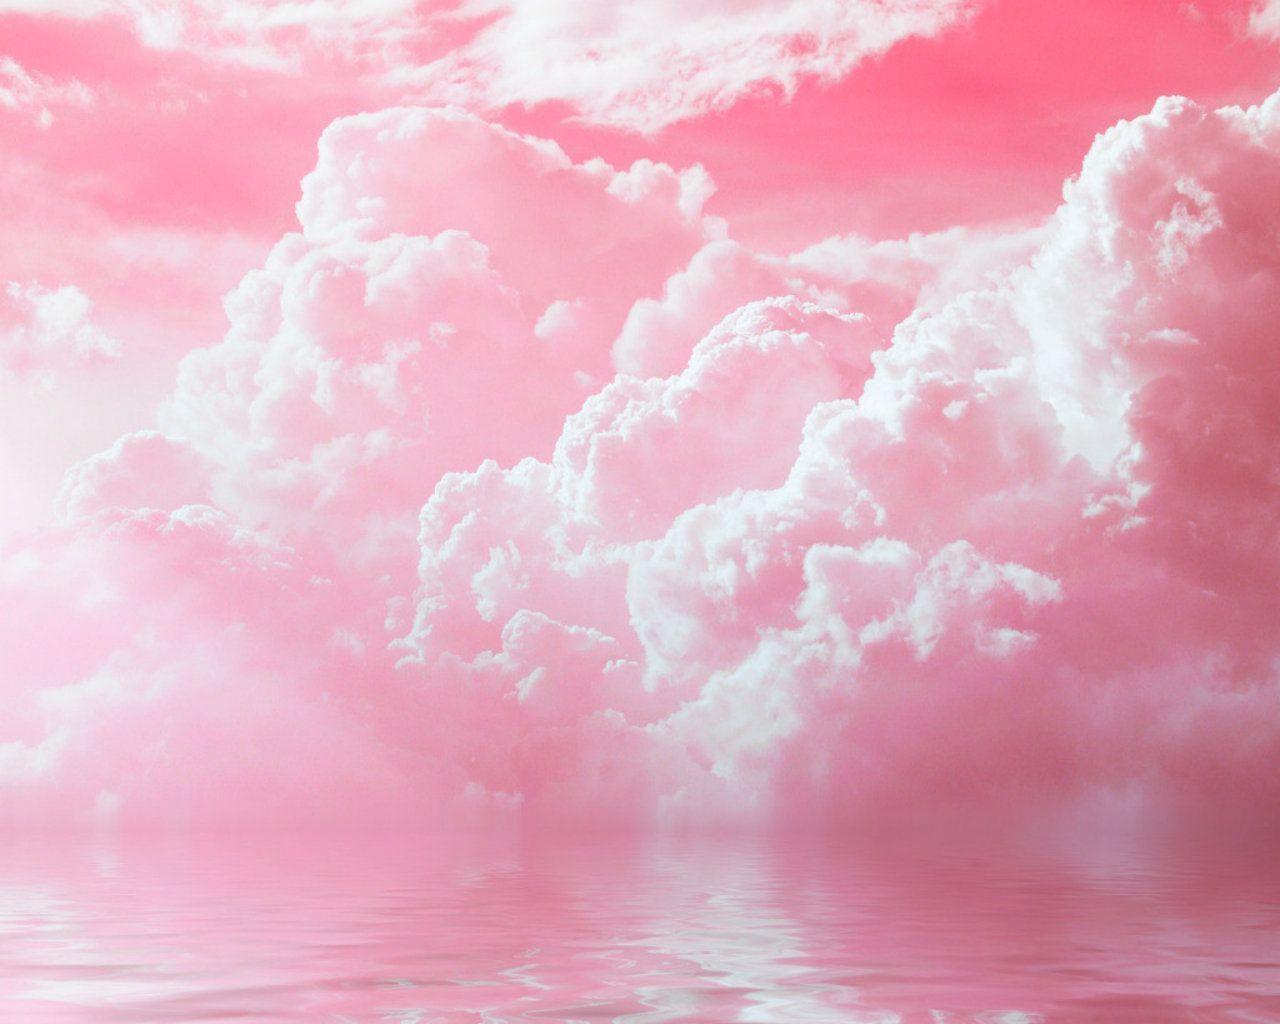 Aesthetic Pink Backgrounds HD Free download 